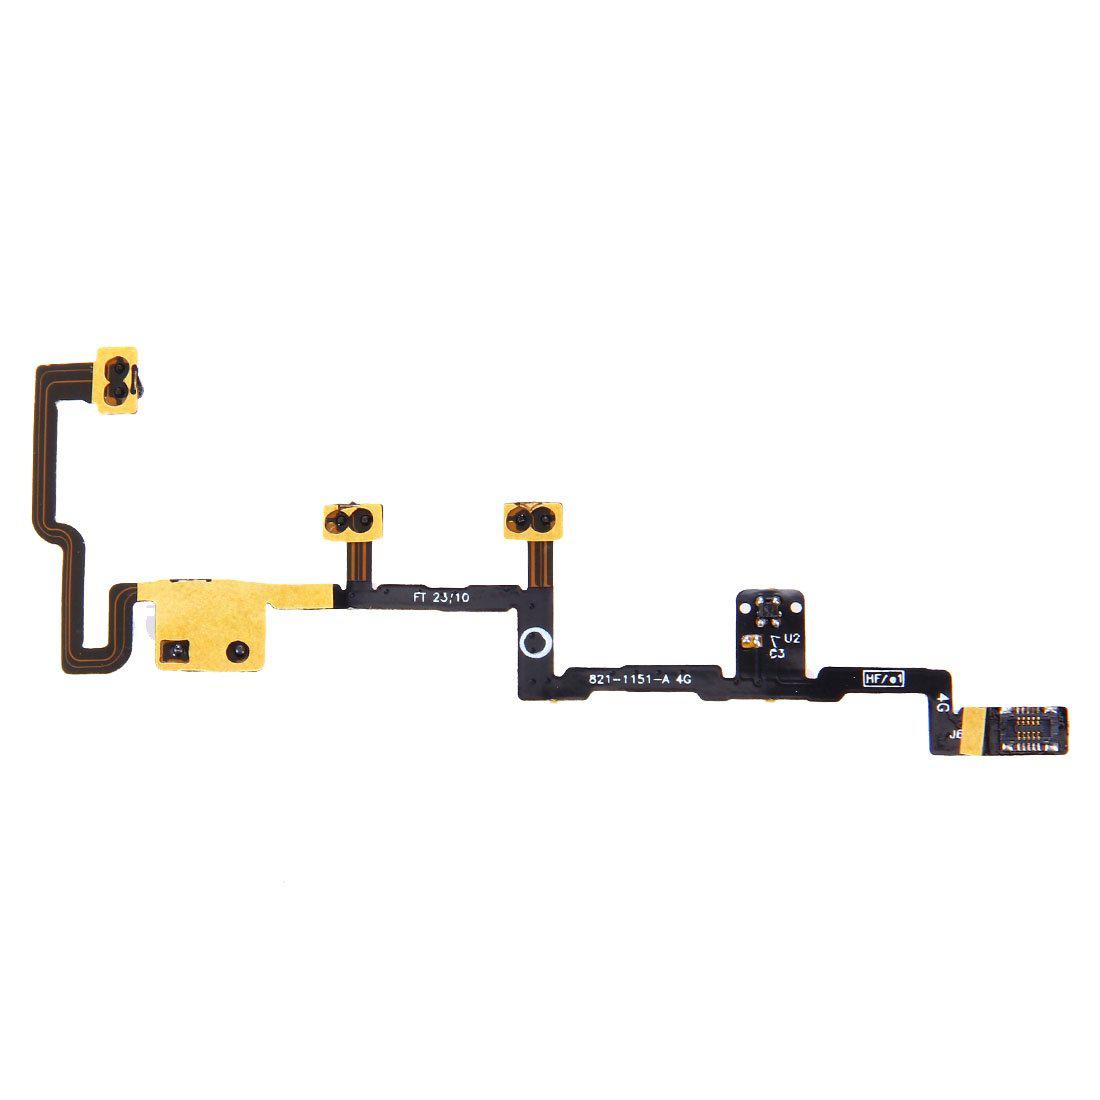 Apple iPad 2 - Power On/Off Volume Buttons Flex Cable for [product_price] - First Help Tech